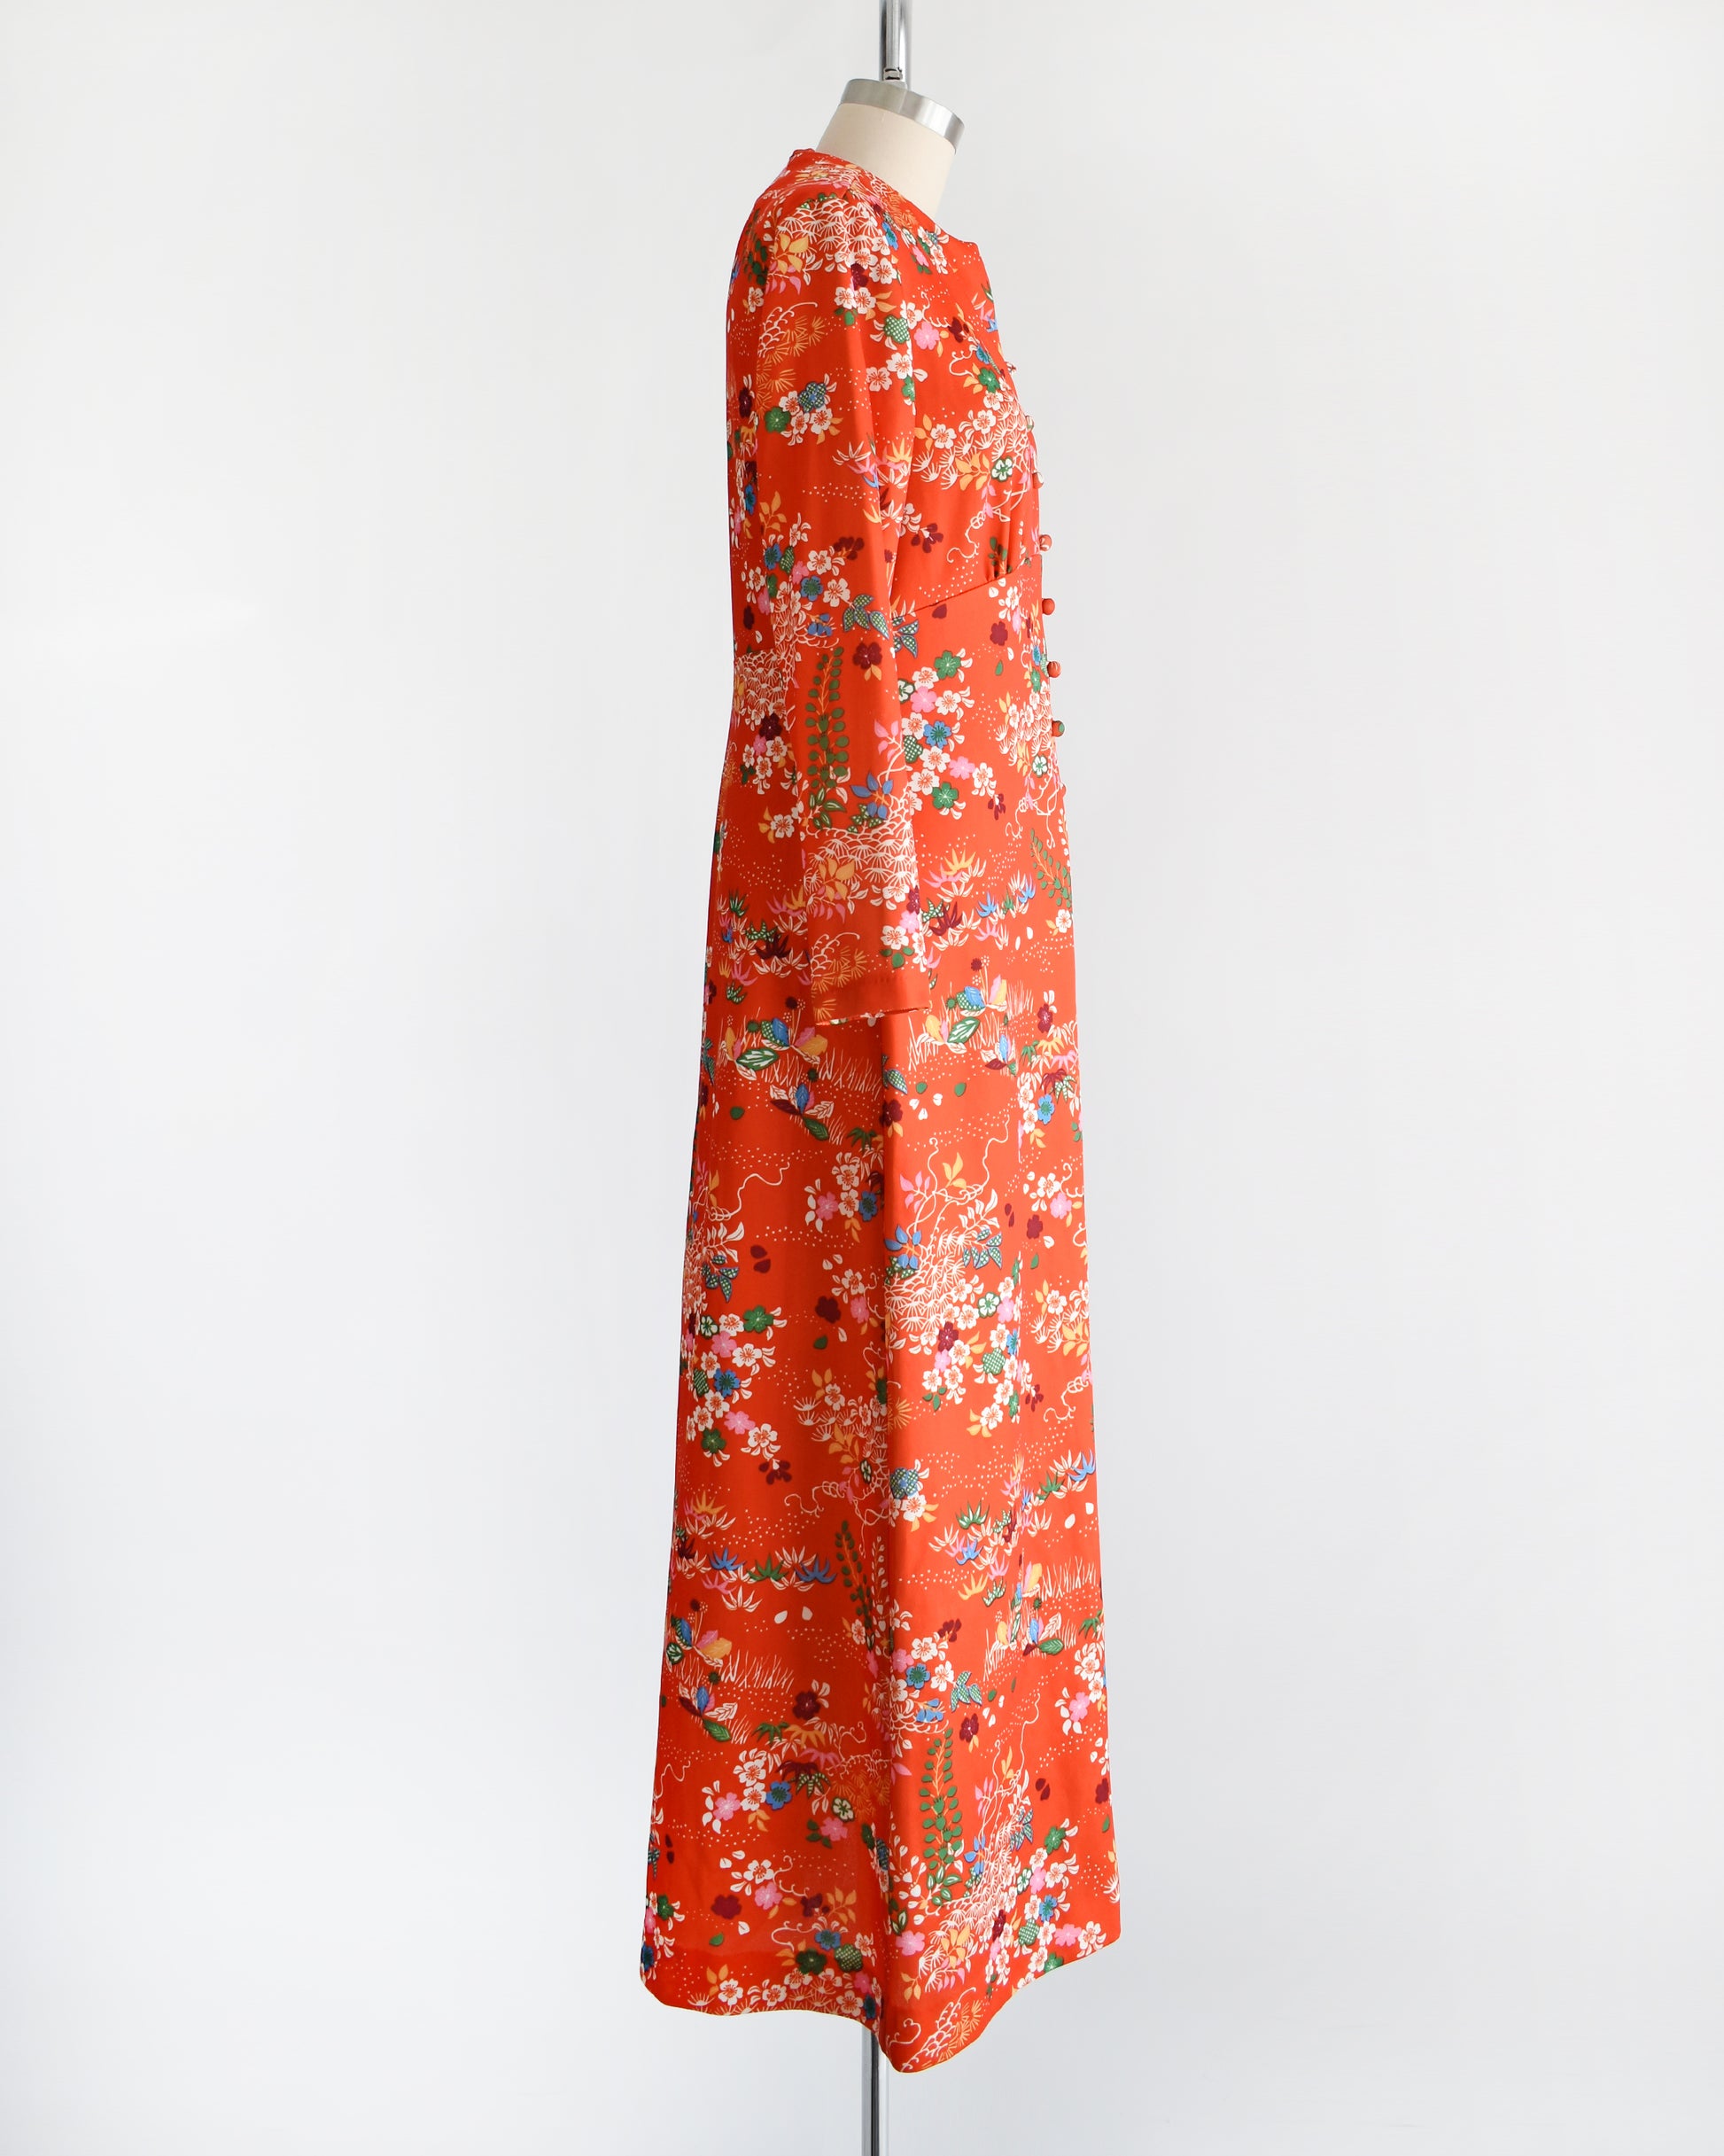 Side view of a vintage 1970s maxi dress features a vibrant red-orange hue, with a delightful floral and dotted print in homage to traditional Japanese flower designs. 